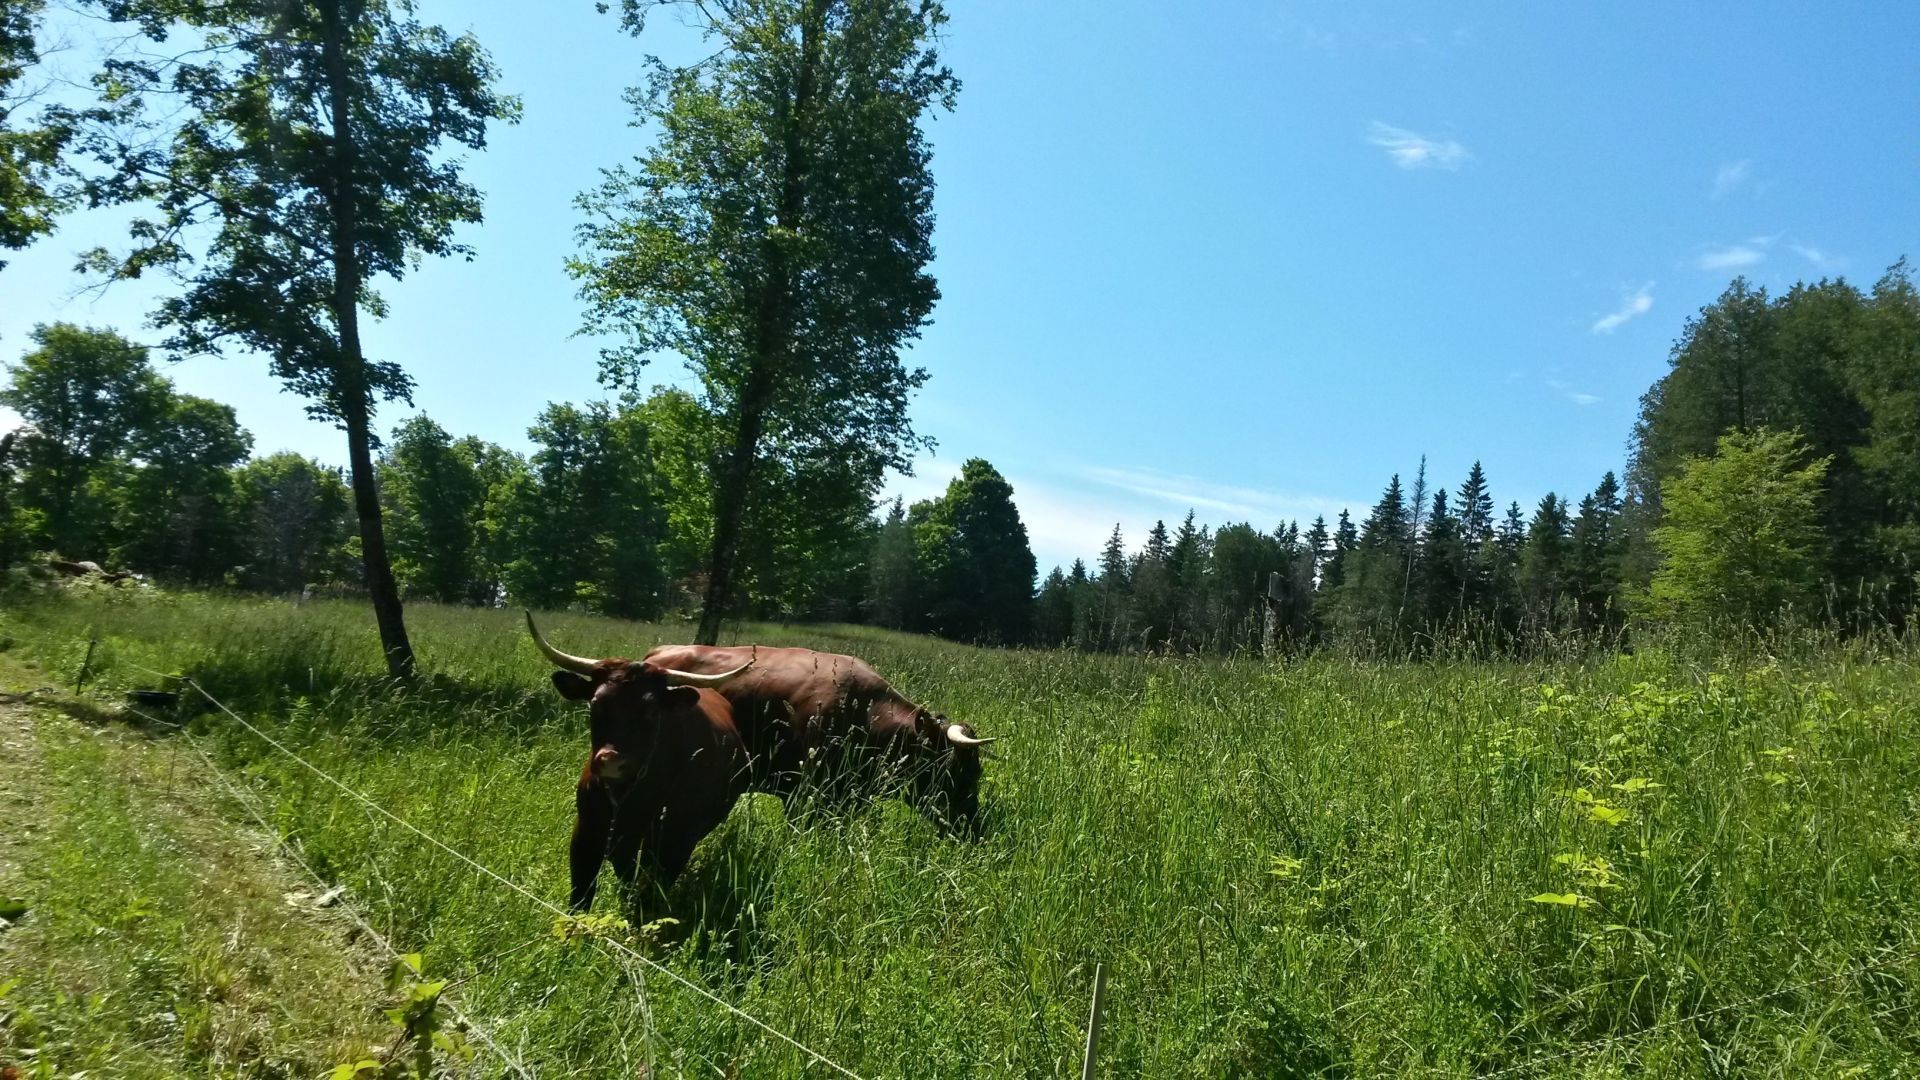 Cattle grazing in Sky Meadow with forest behind them